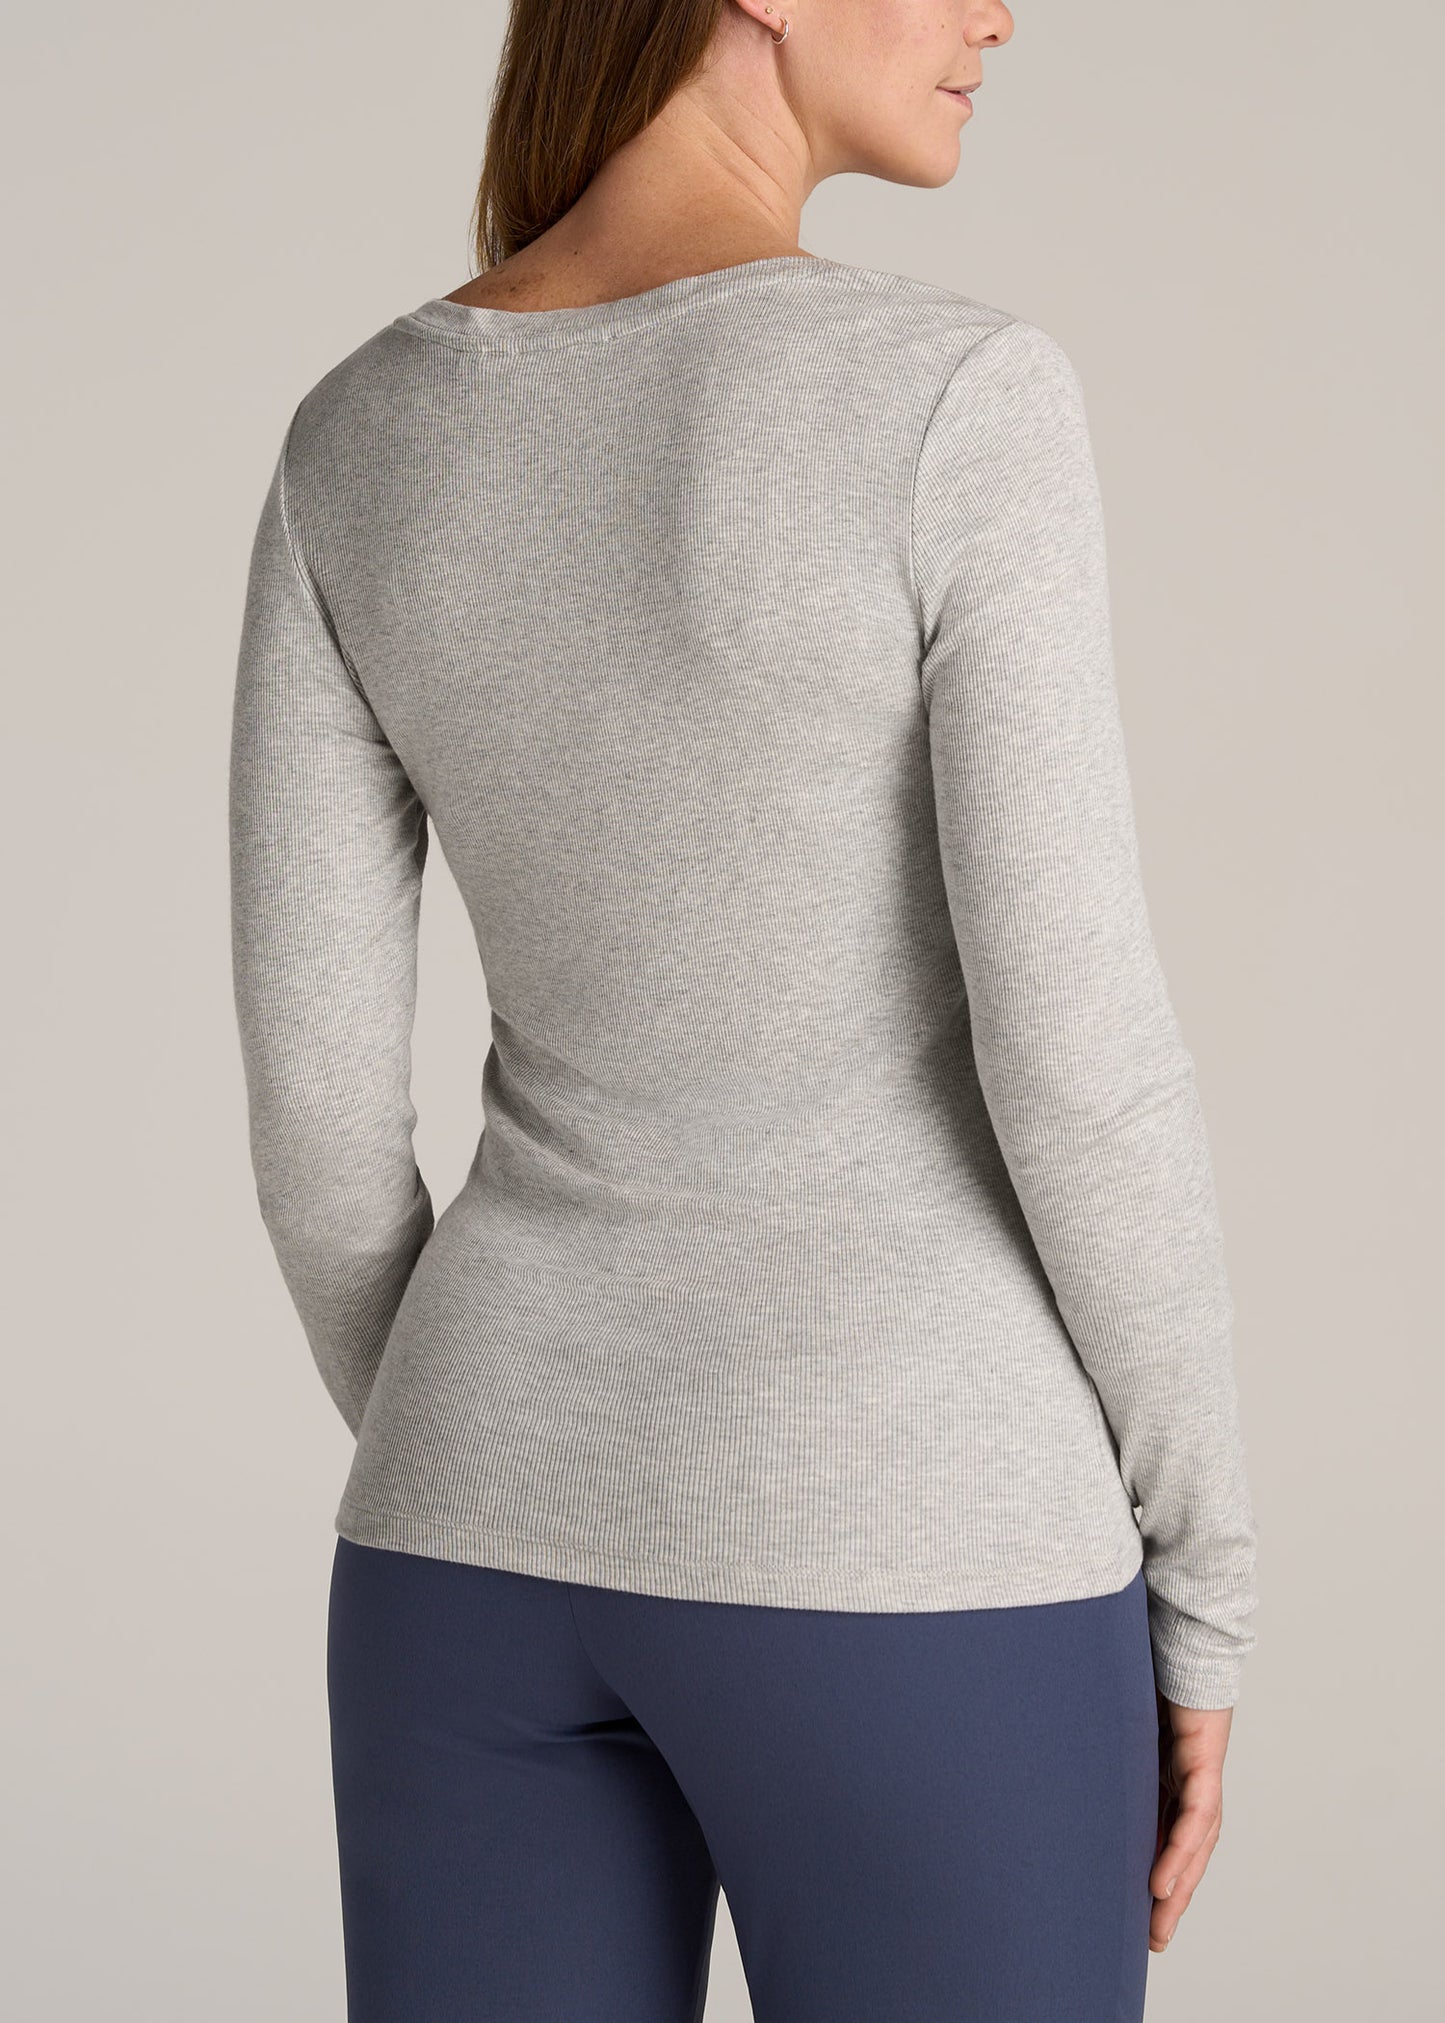 Tall Women's FITTED Ribbed Long Sleeve Henley in Grey Mix